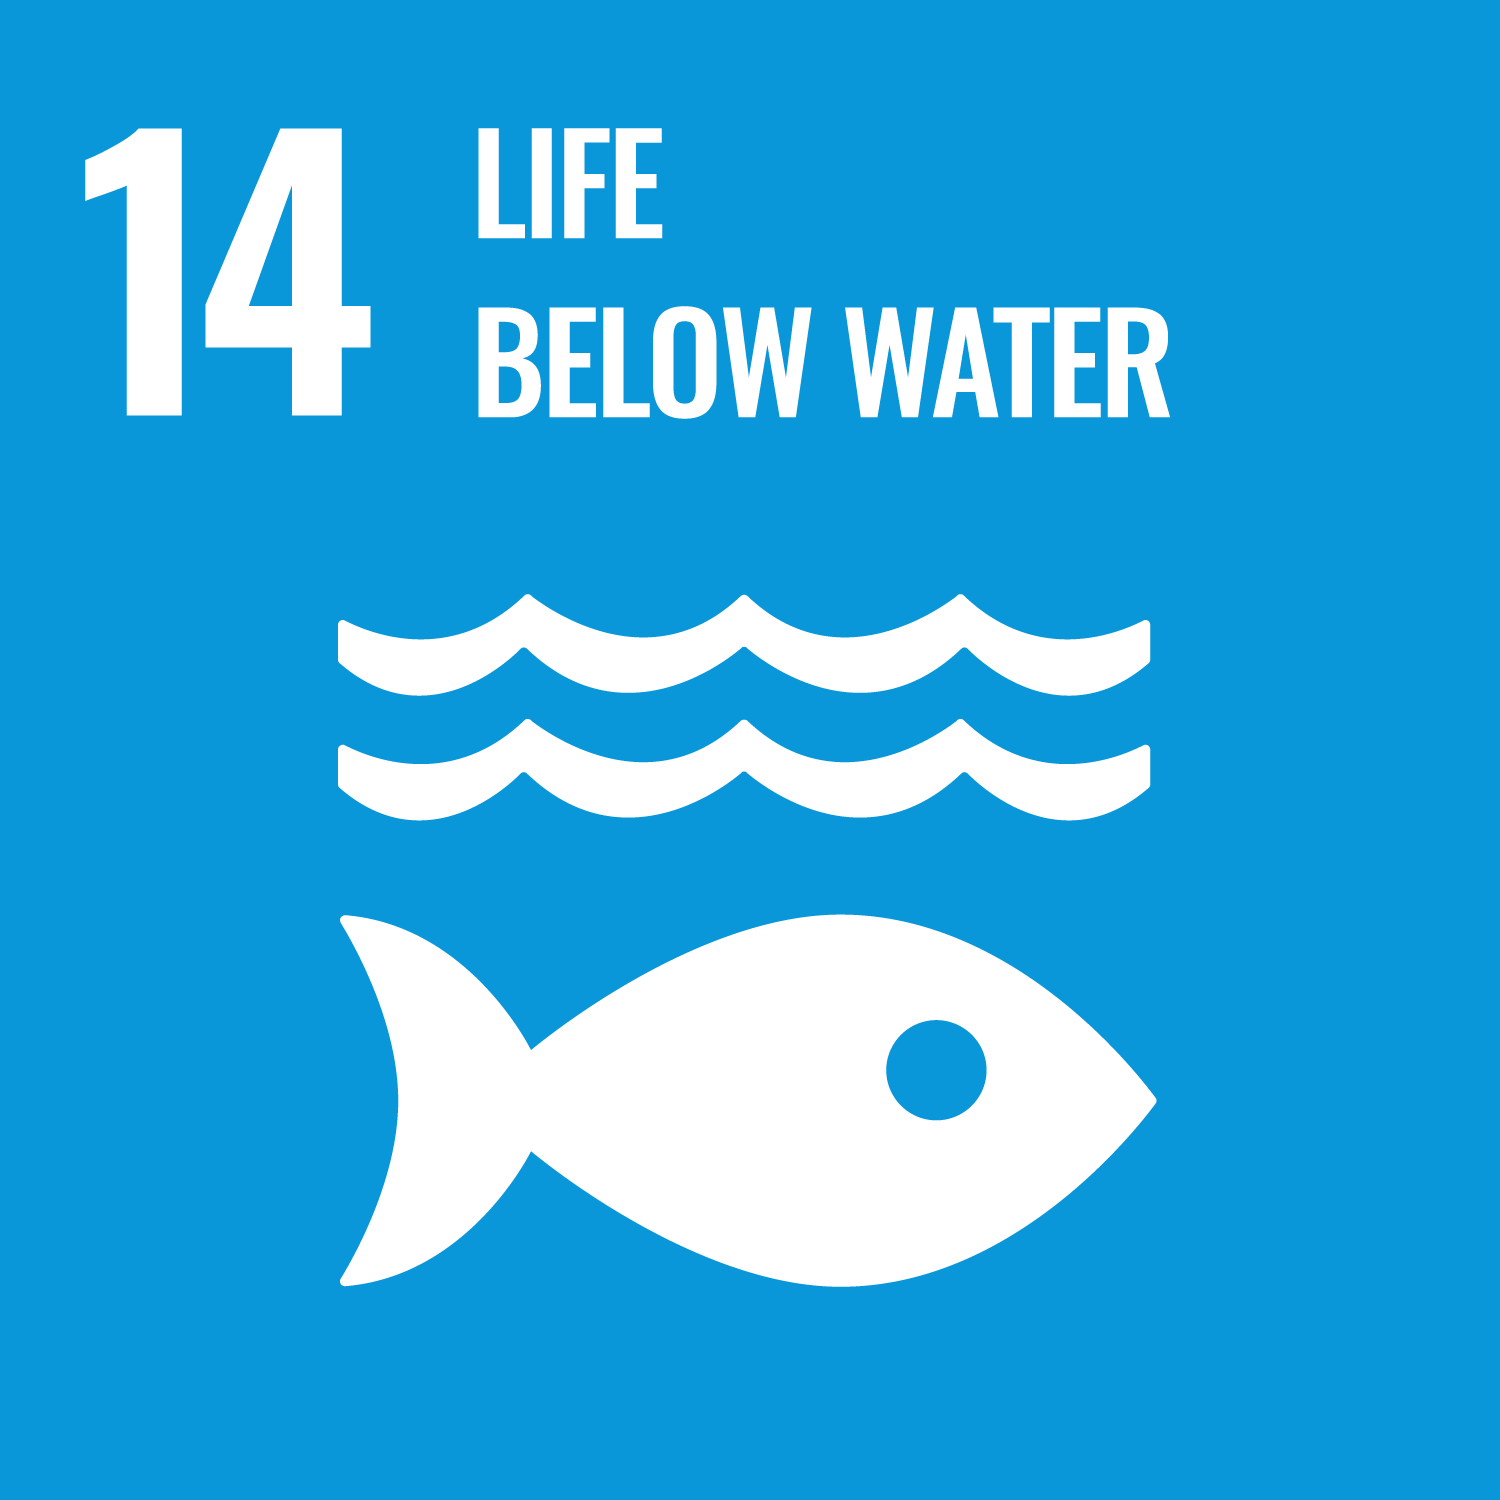 SDG 14, Life Below Water. Blue background with white images symbolizing waves and a fish